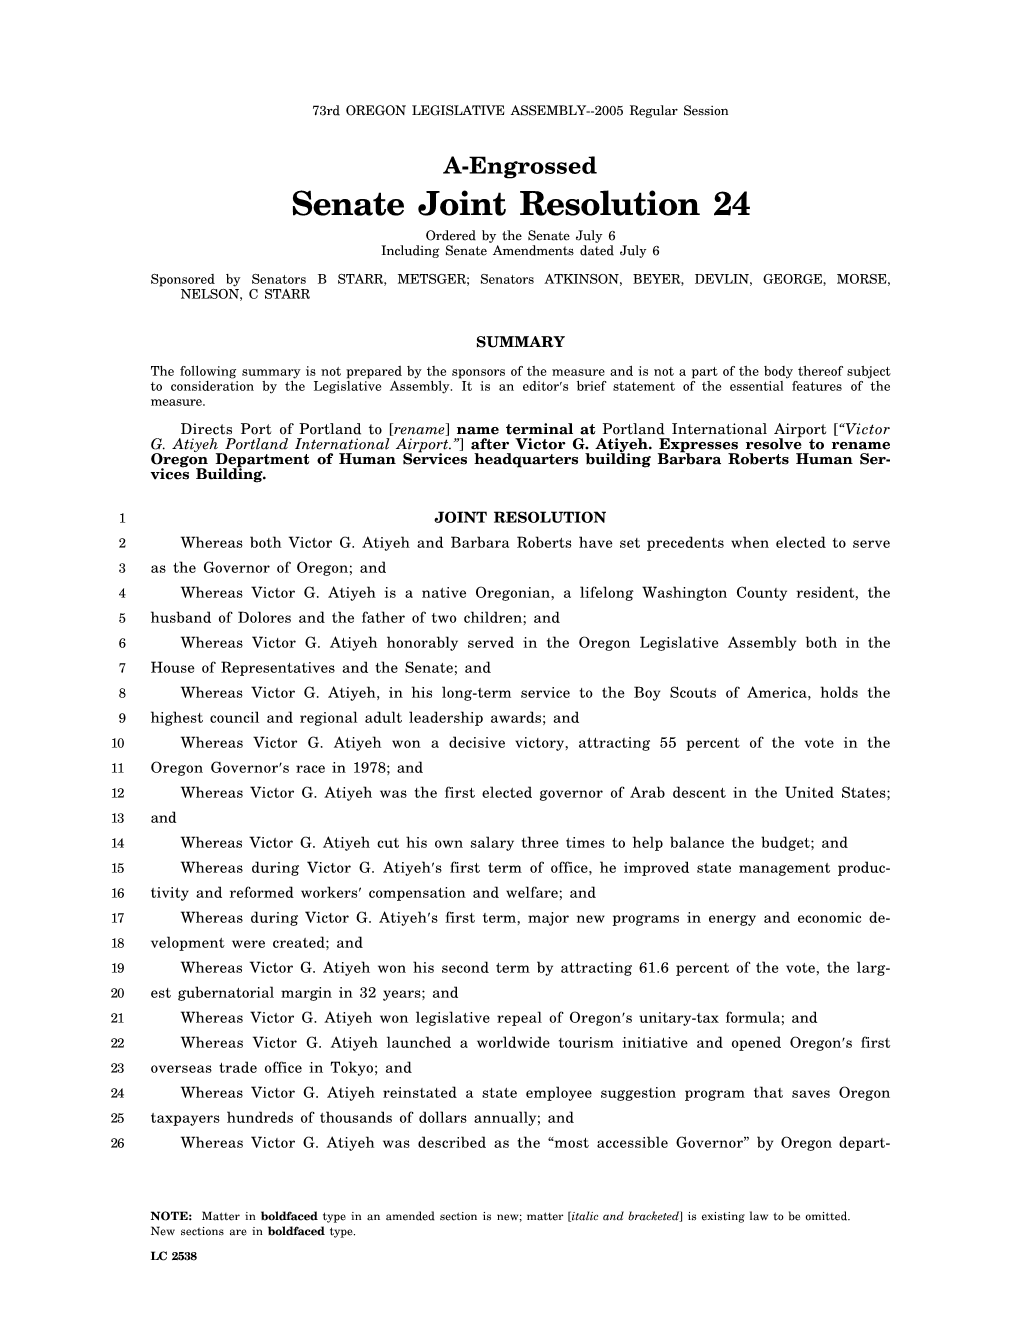 Senate Joint Resolution 24 Ordered by the Senate July 6 Including Senate Amendments Dated July 6